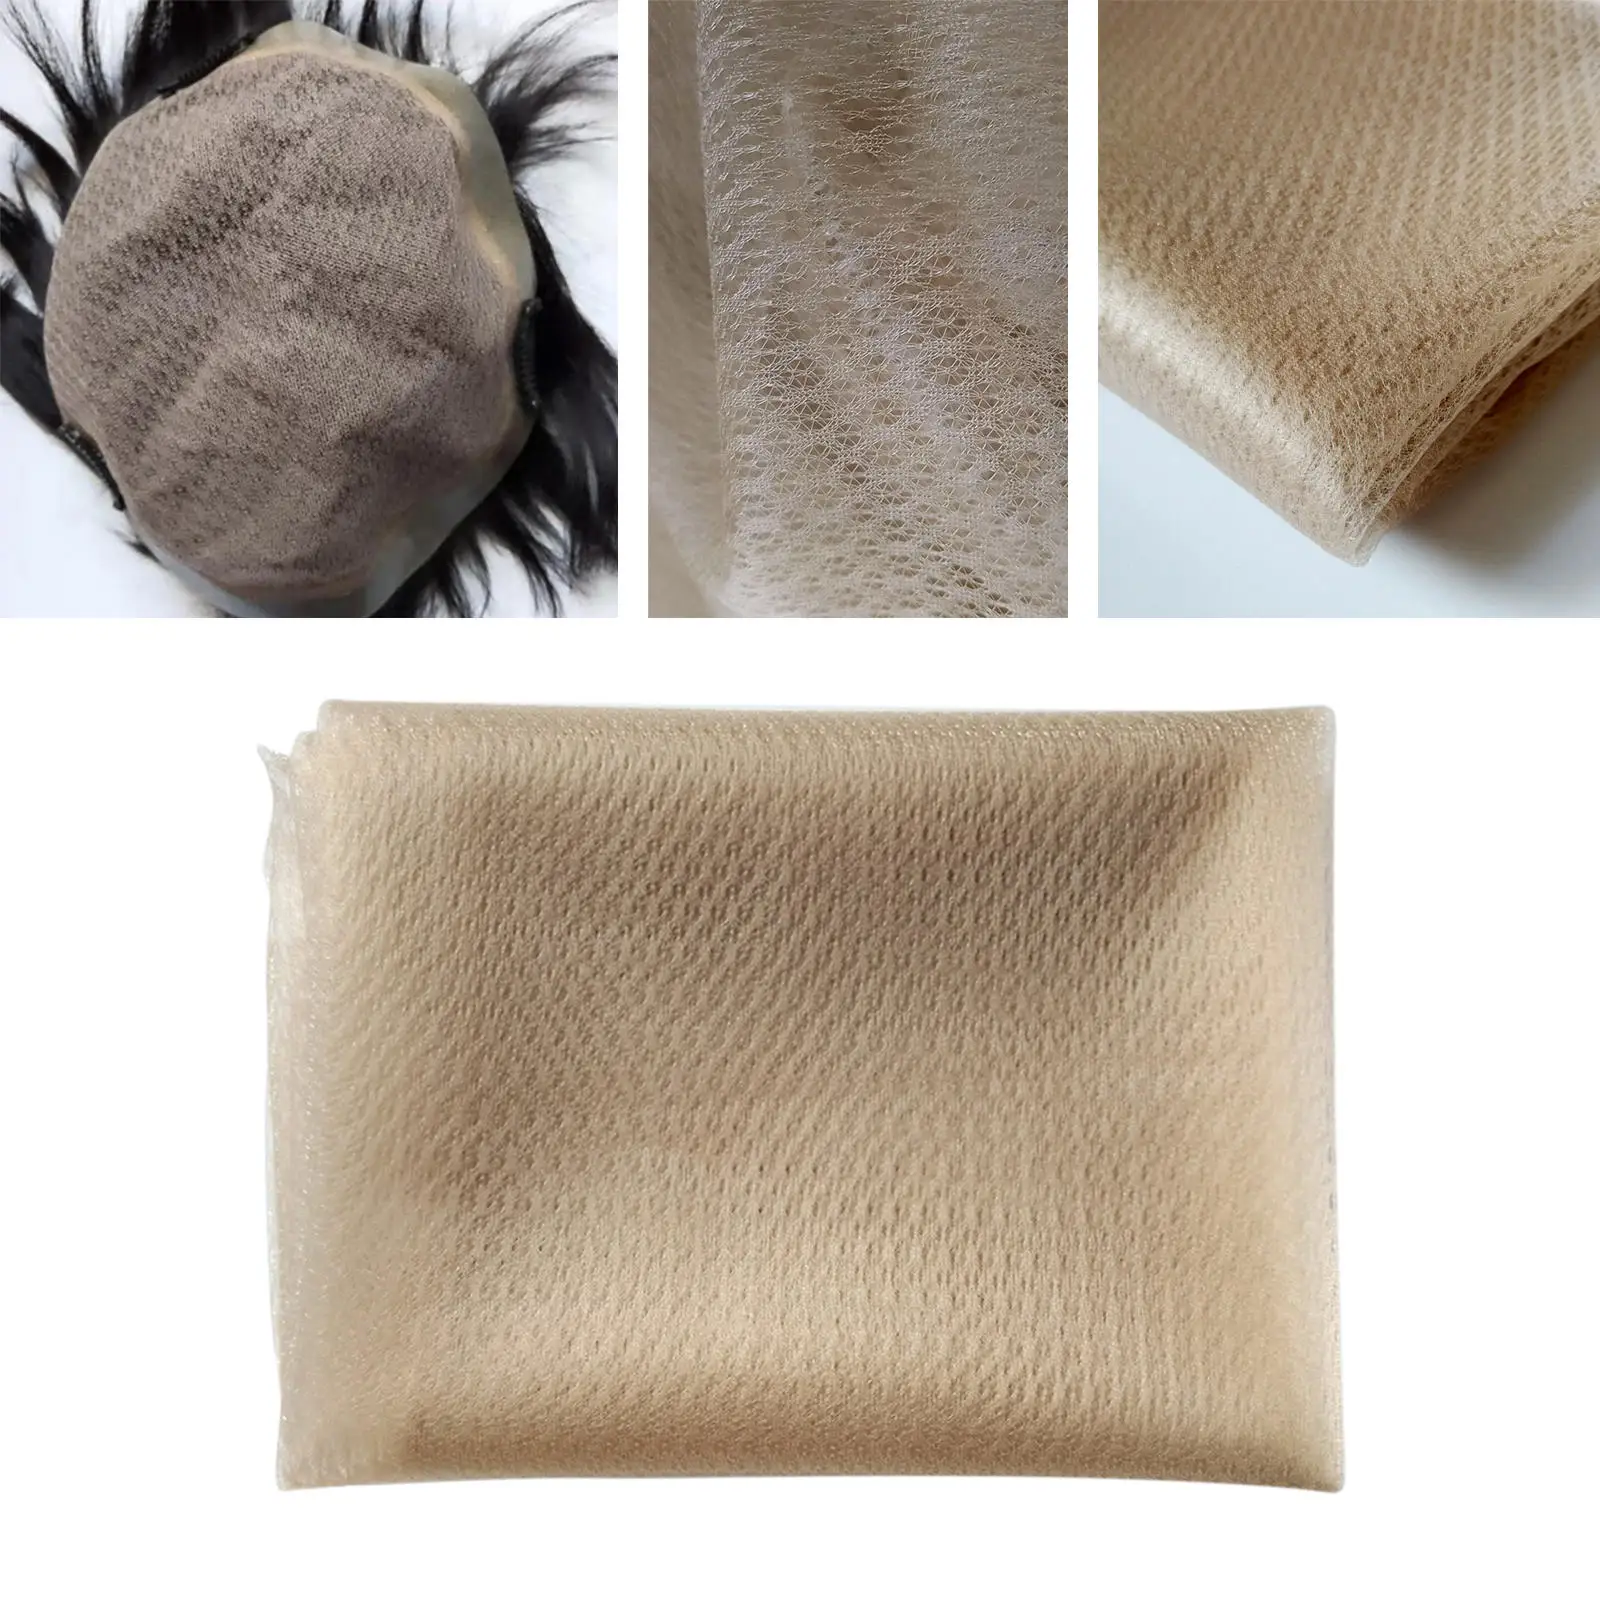 Lace Net 1 Yard Mesh Hairnet Wig Caps for Frontals Closures Wigs Making Closure Caps Toupee